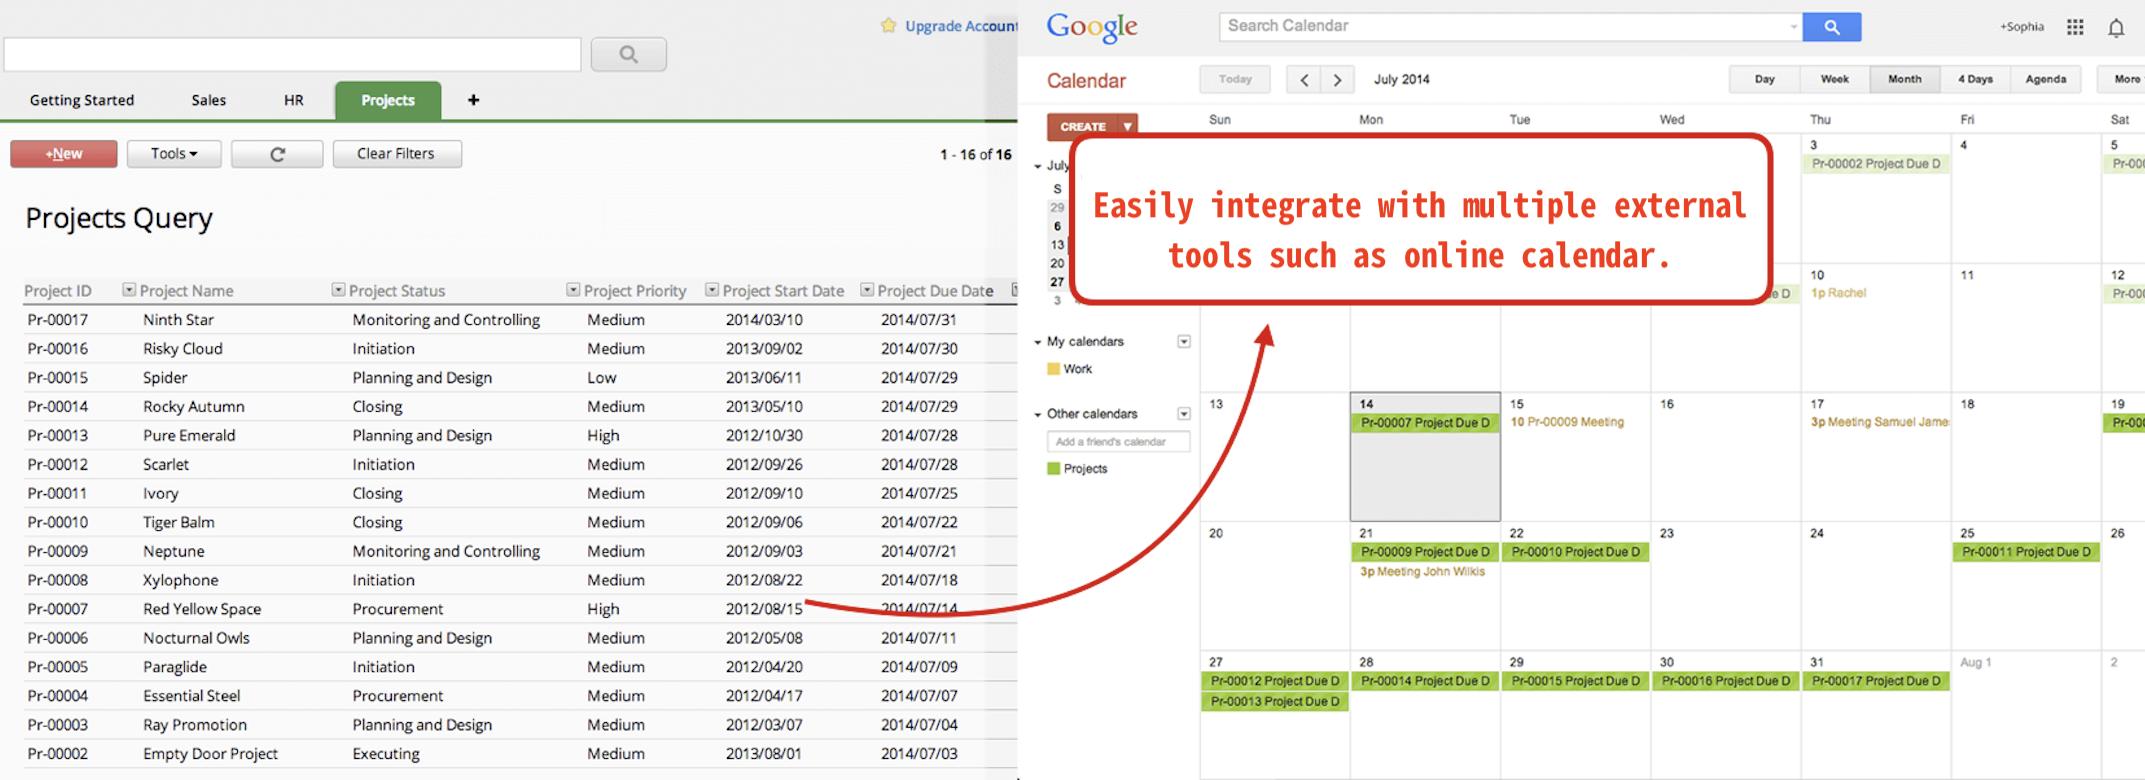 Easily integrate with multiple external tools such as online calendar.